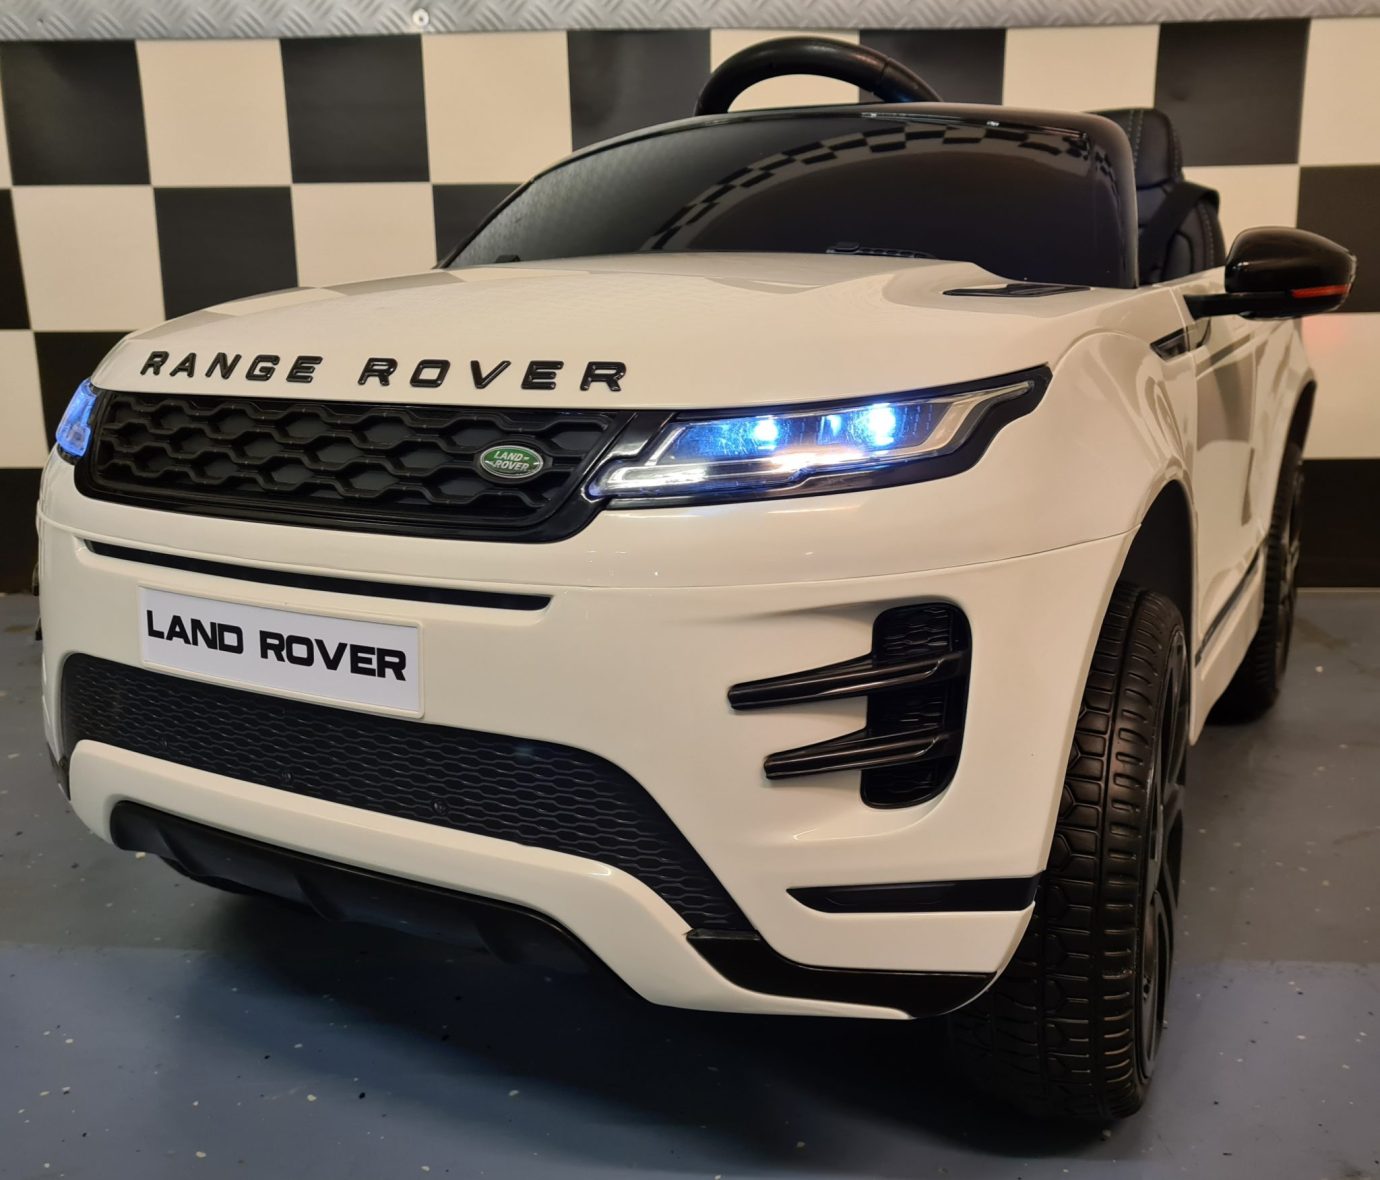 Electric Children’s Car Range Rover Evoque with 4 Engines White